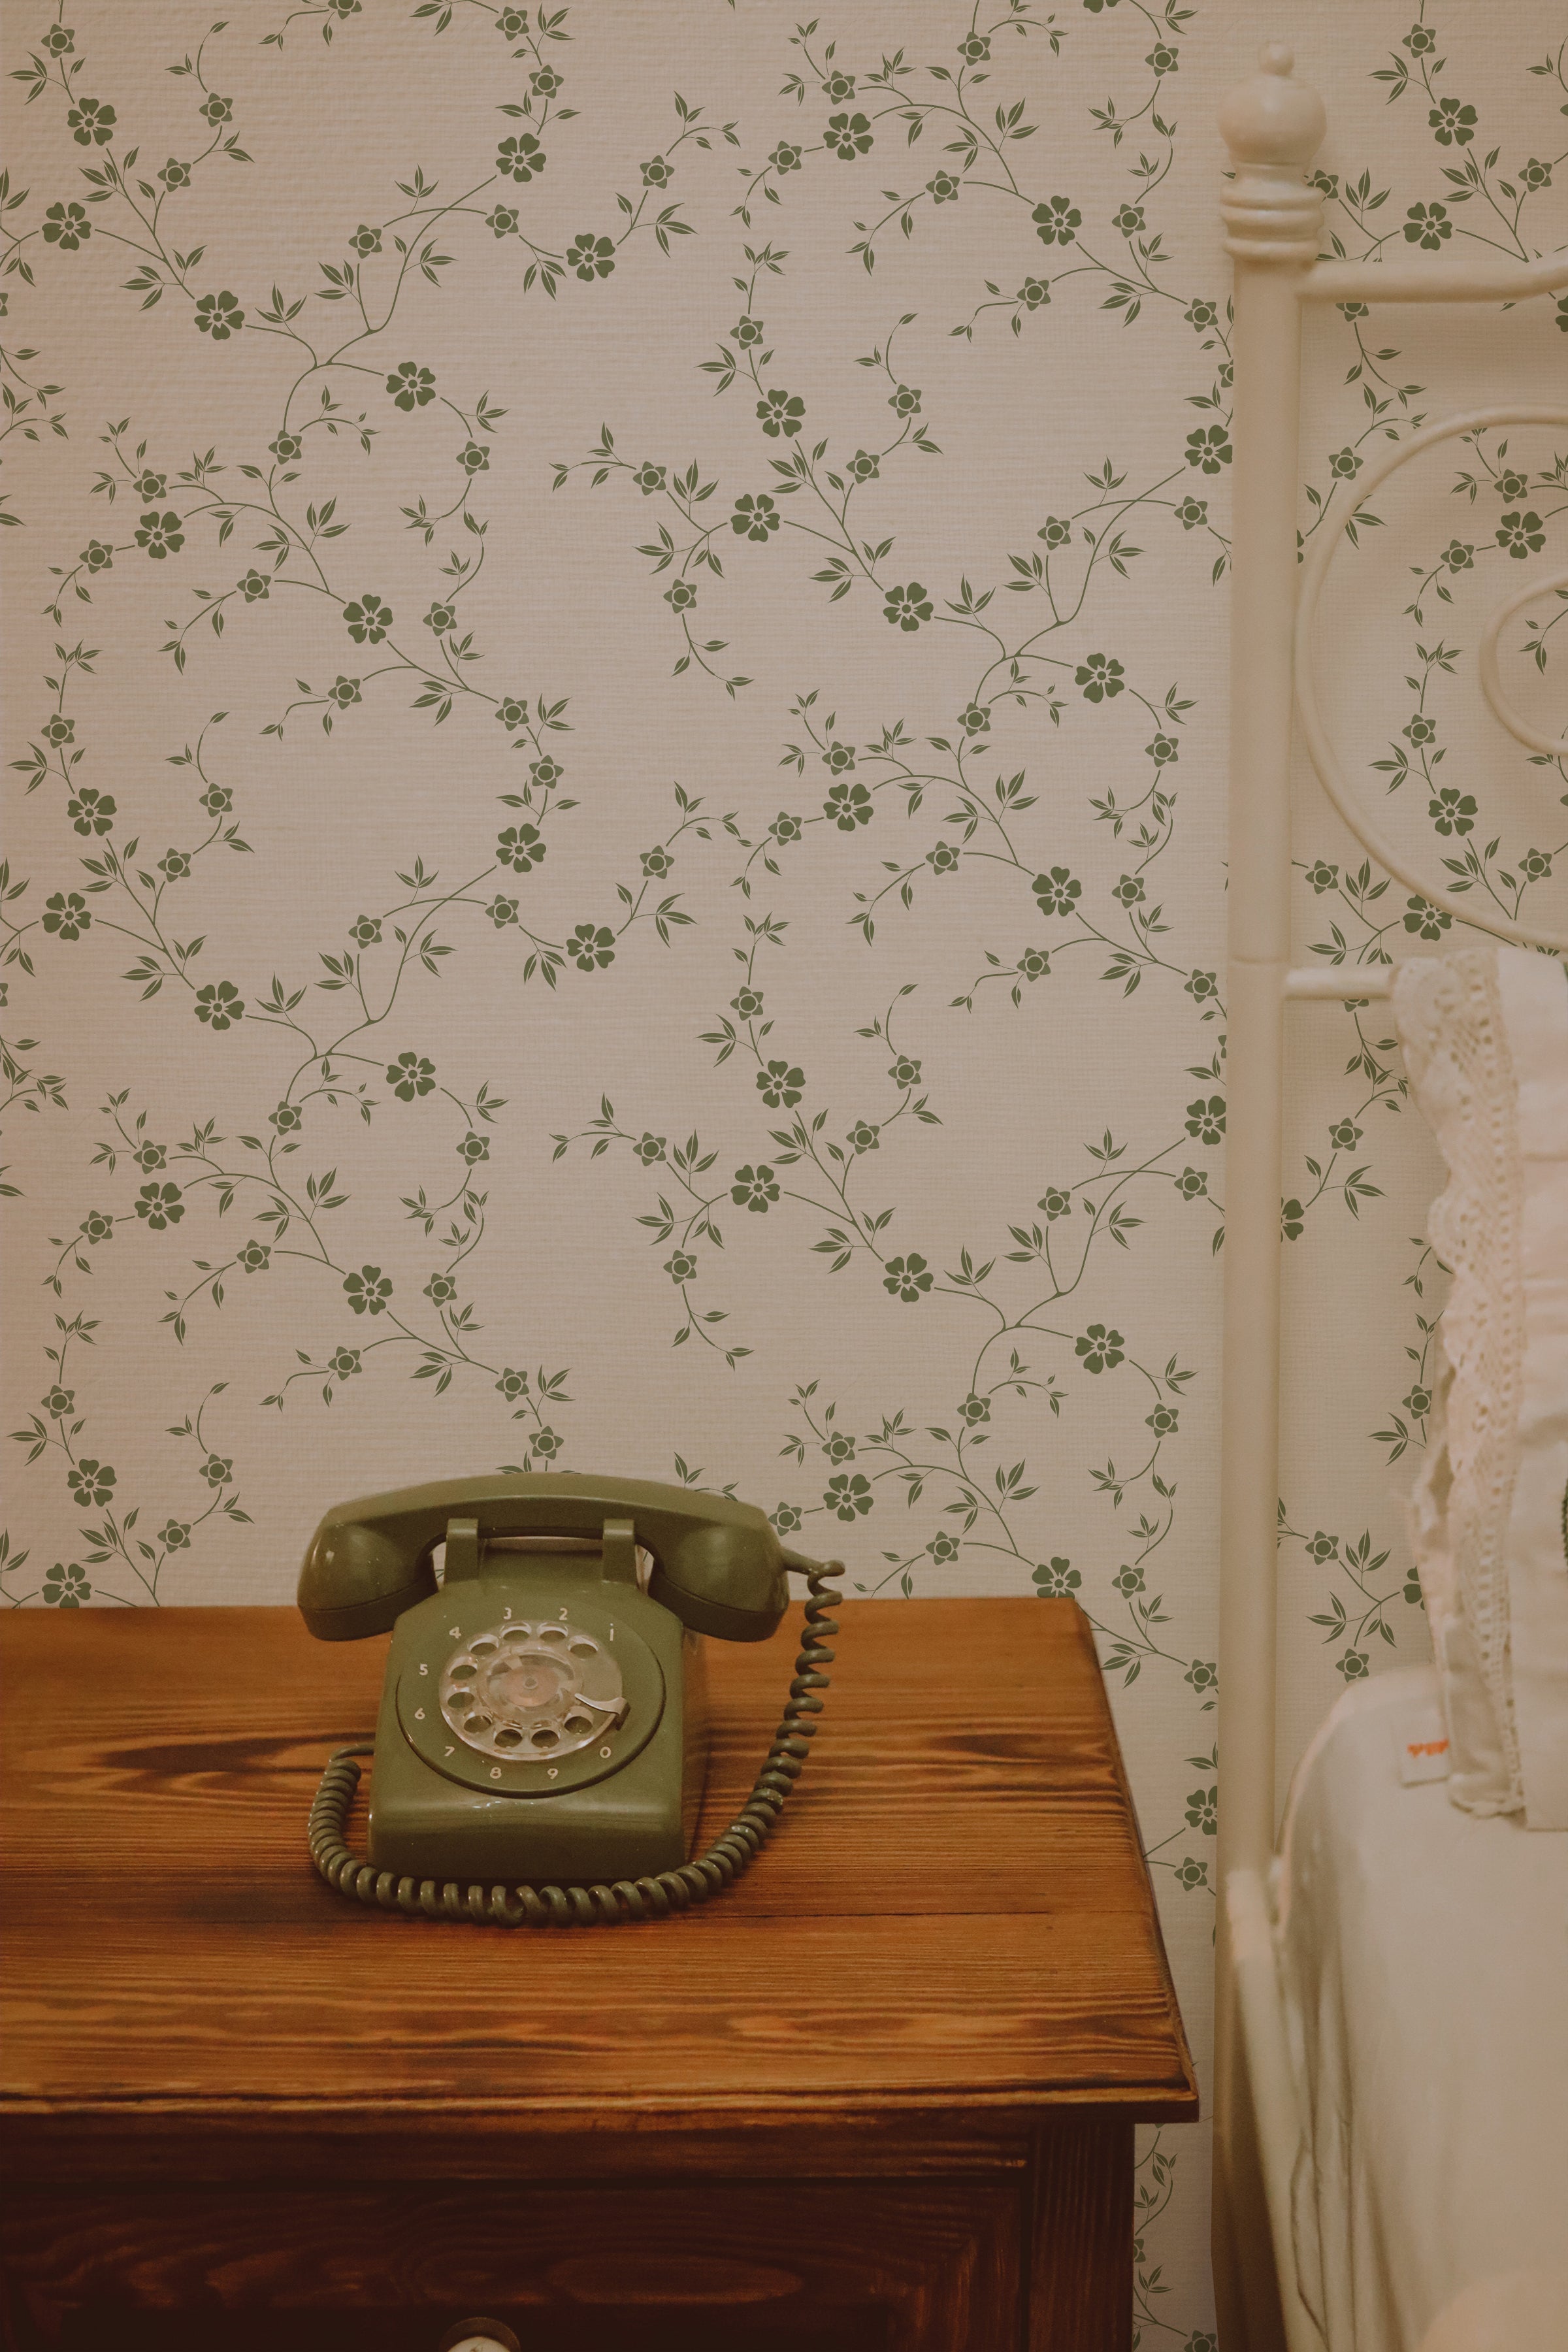 A vintage green rotary telephone sits on a wooden nightstand, next to an iron bed with white linens. The wall behind is adorned with the Charming Floral Wallpaper-Moss, featuring a delicate, intertwined green floral pattern on a warm beige background.